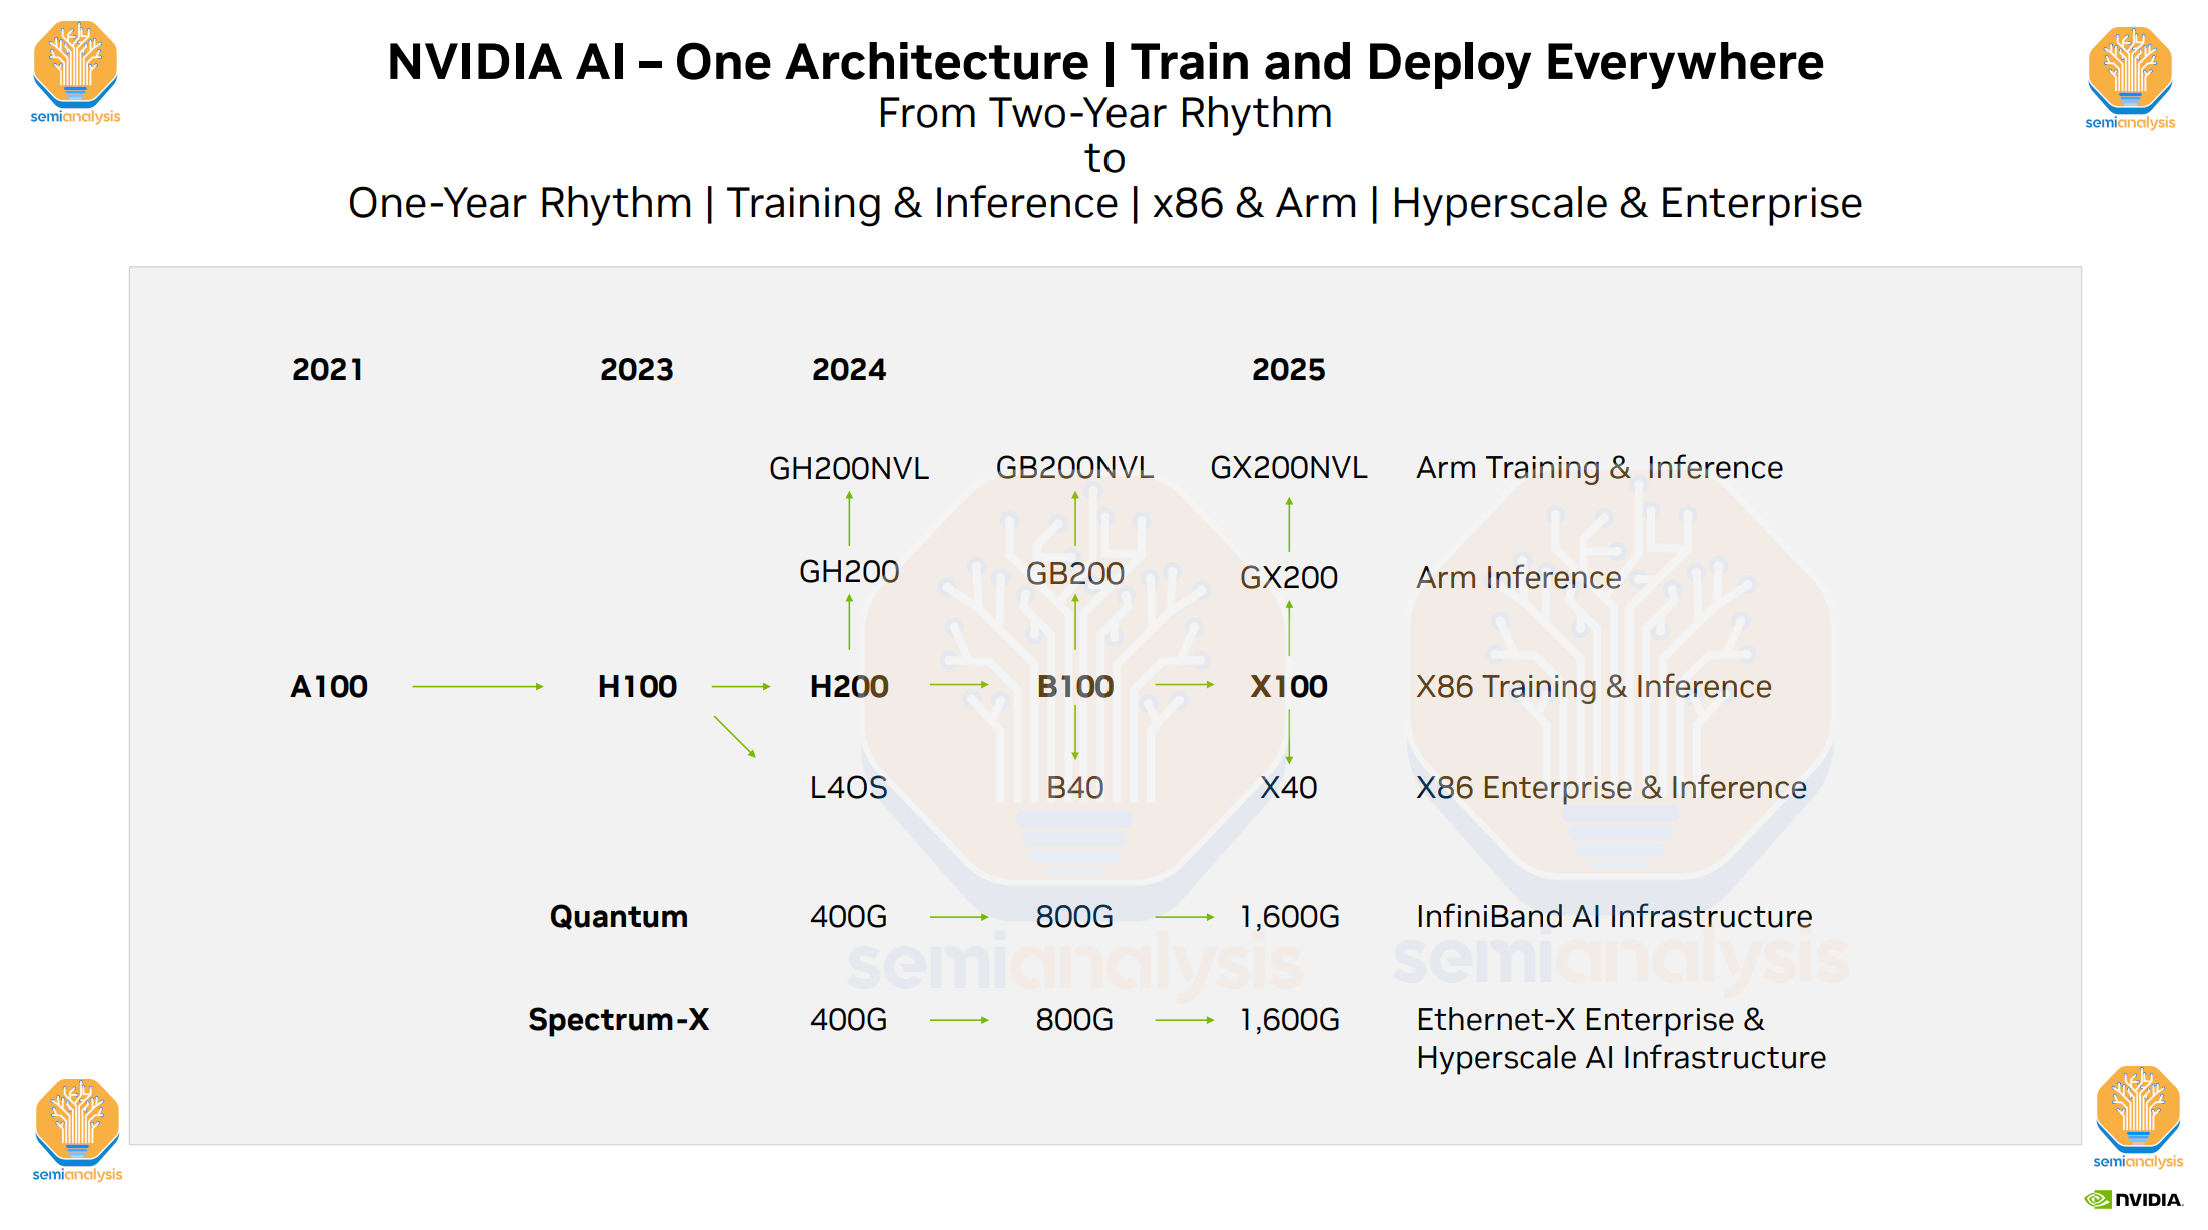 What prevents Nvidia from learning from AMD's HBM and create their